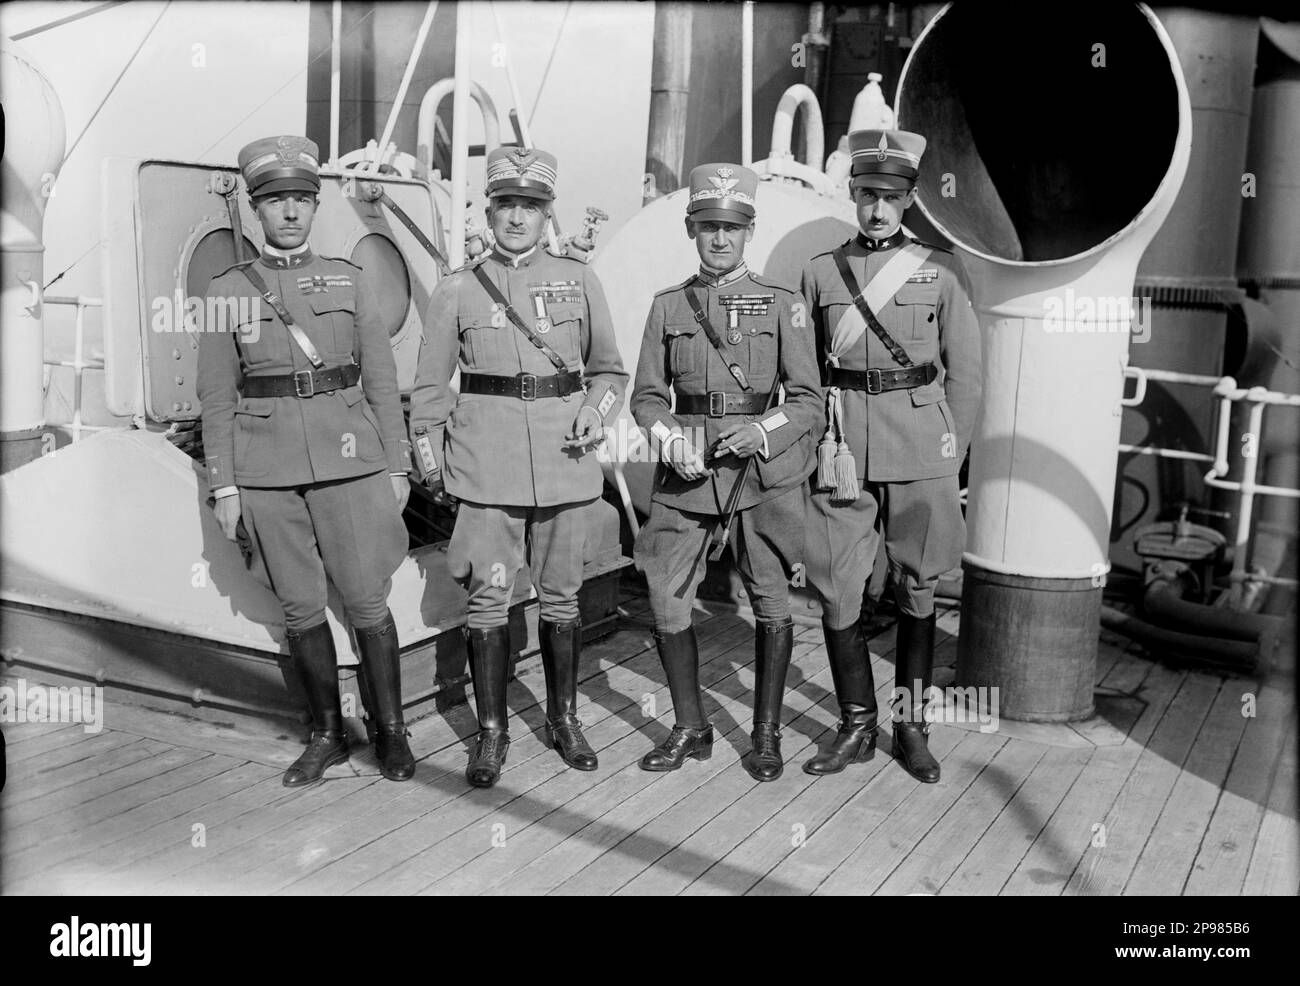 1921, 18 october , New York , USA  : The italian Generale and  Marshal of Italy  ARMANDO DIAZ  ( 1861 - 1928 ) arrive in USA . In this photo ( from left ):  COCCONI , Generale  Armando DIAZ , Generale DE LUCA KENNEDY , Principe Costantino RUSPOLI di Poggio Suasa ( New York 1891 - Egypt , El Alamein 1942 ).  On November 1, 1921 Diaz was in Kansas City to take part in the groundbreaking ceremony for the Liberty Memorial that was being constructed there. Also present that day were Lieutenant General Baron Jacques of Belgium, Admiral David Beatty of Great Britain, Marshal Ferdinand Foch of France Stock Photo